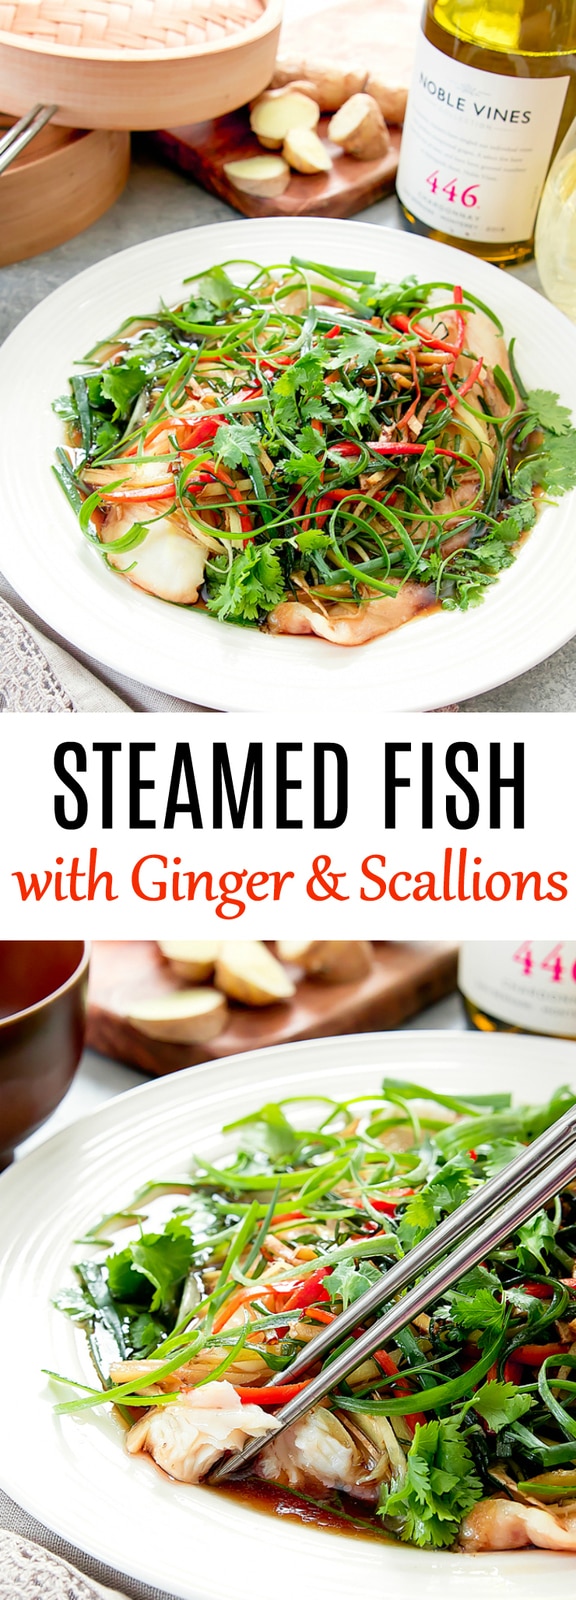 Easy Steamed Fish with Ginger and Scallions - Kirbie's Cravings